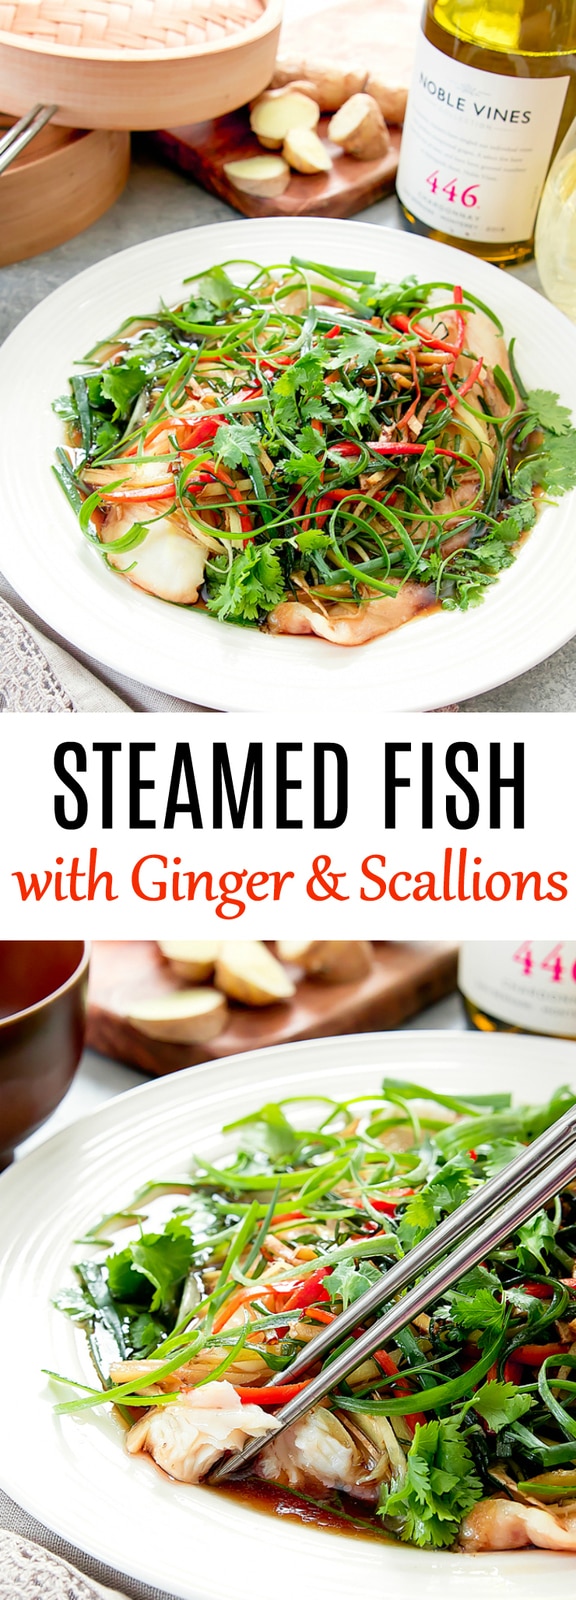 Easy Steamed Fish with Ginger and Scallions - Kirbie's Cravings